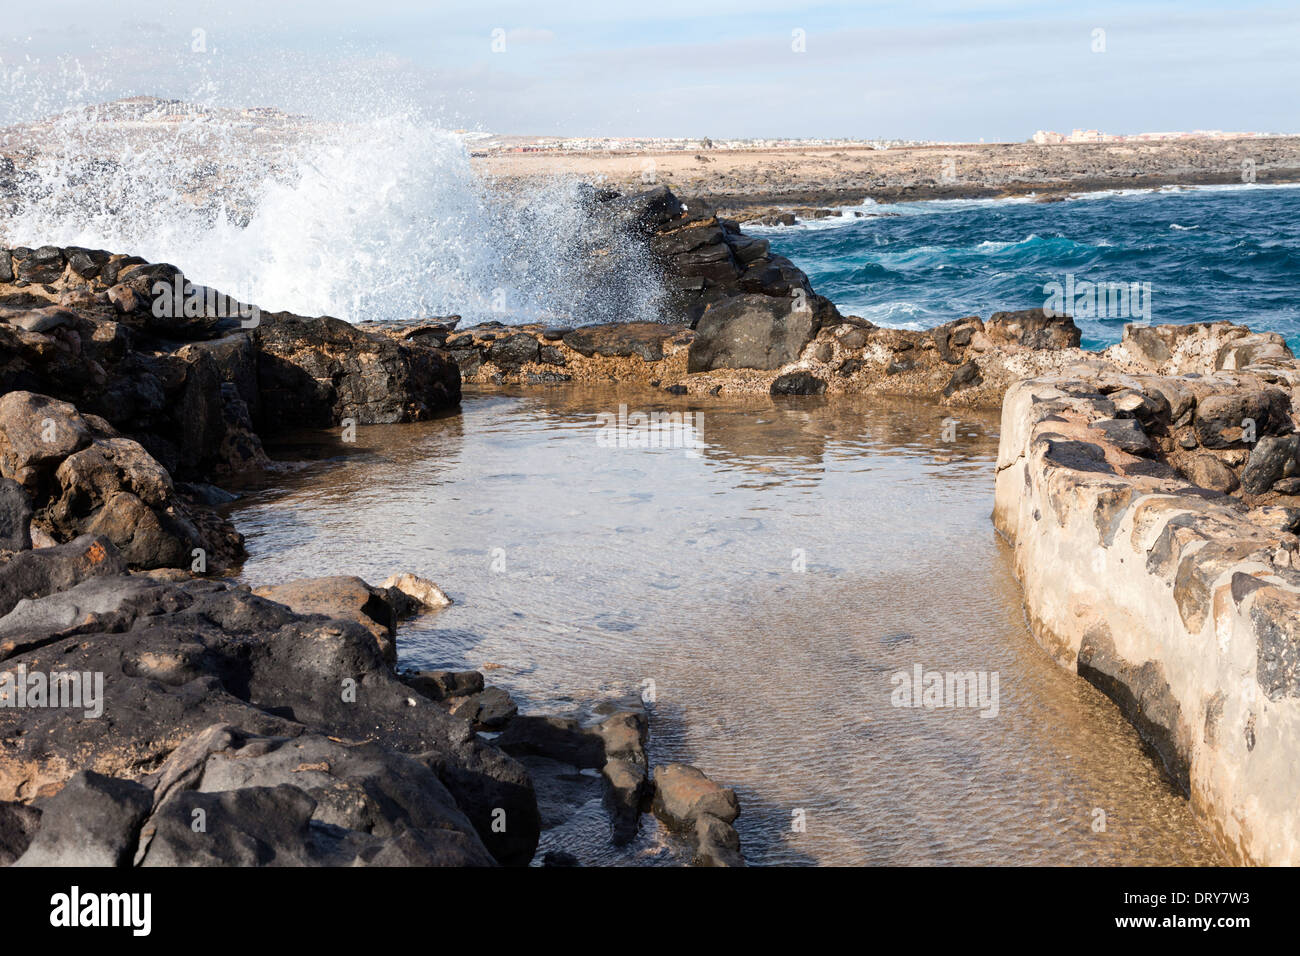 Sea foam at high tide breaking over into the blow hole collecting basin at the Museum of Salt (Museo de la Sal), Fuerteventura Stock Photo